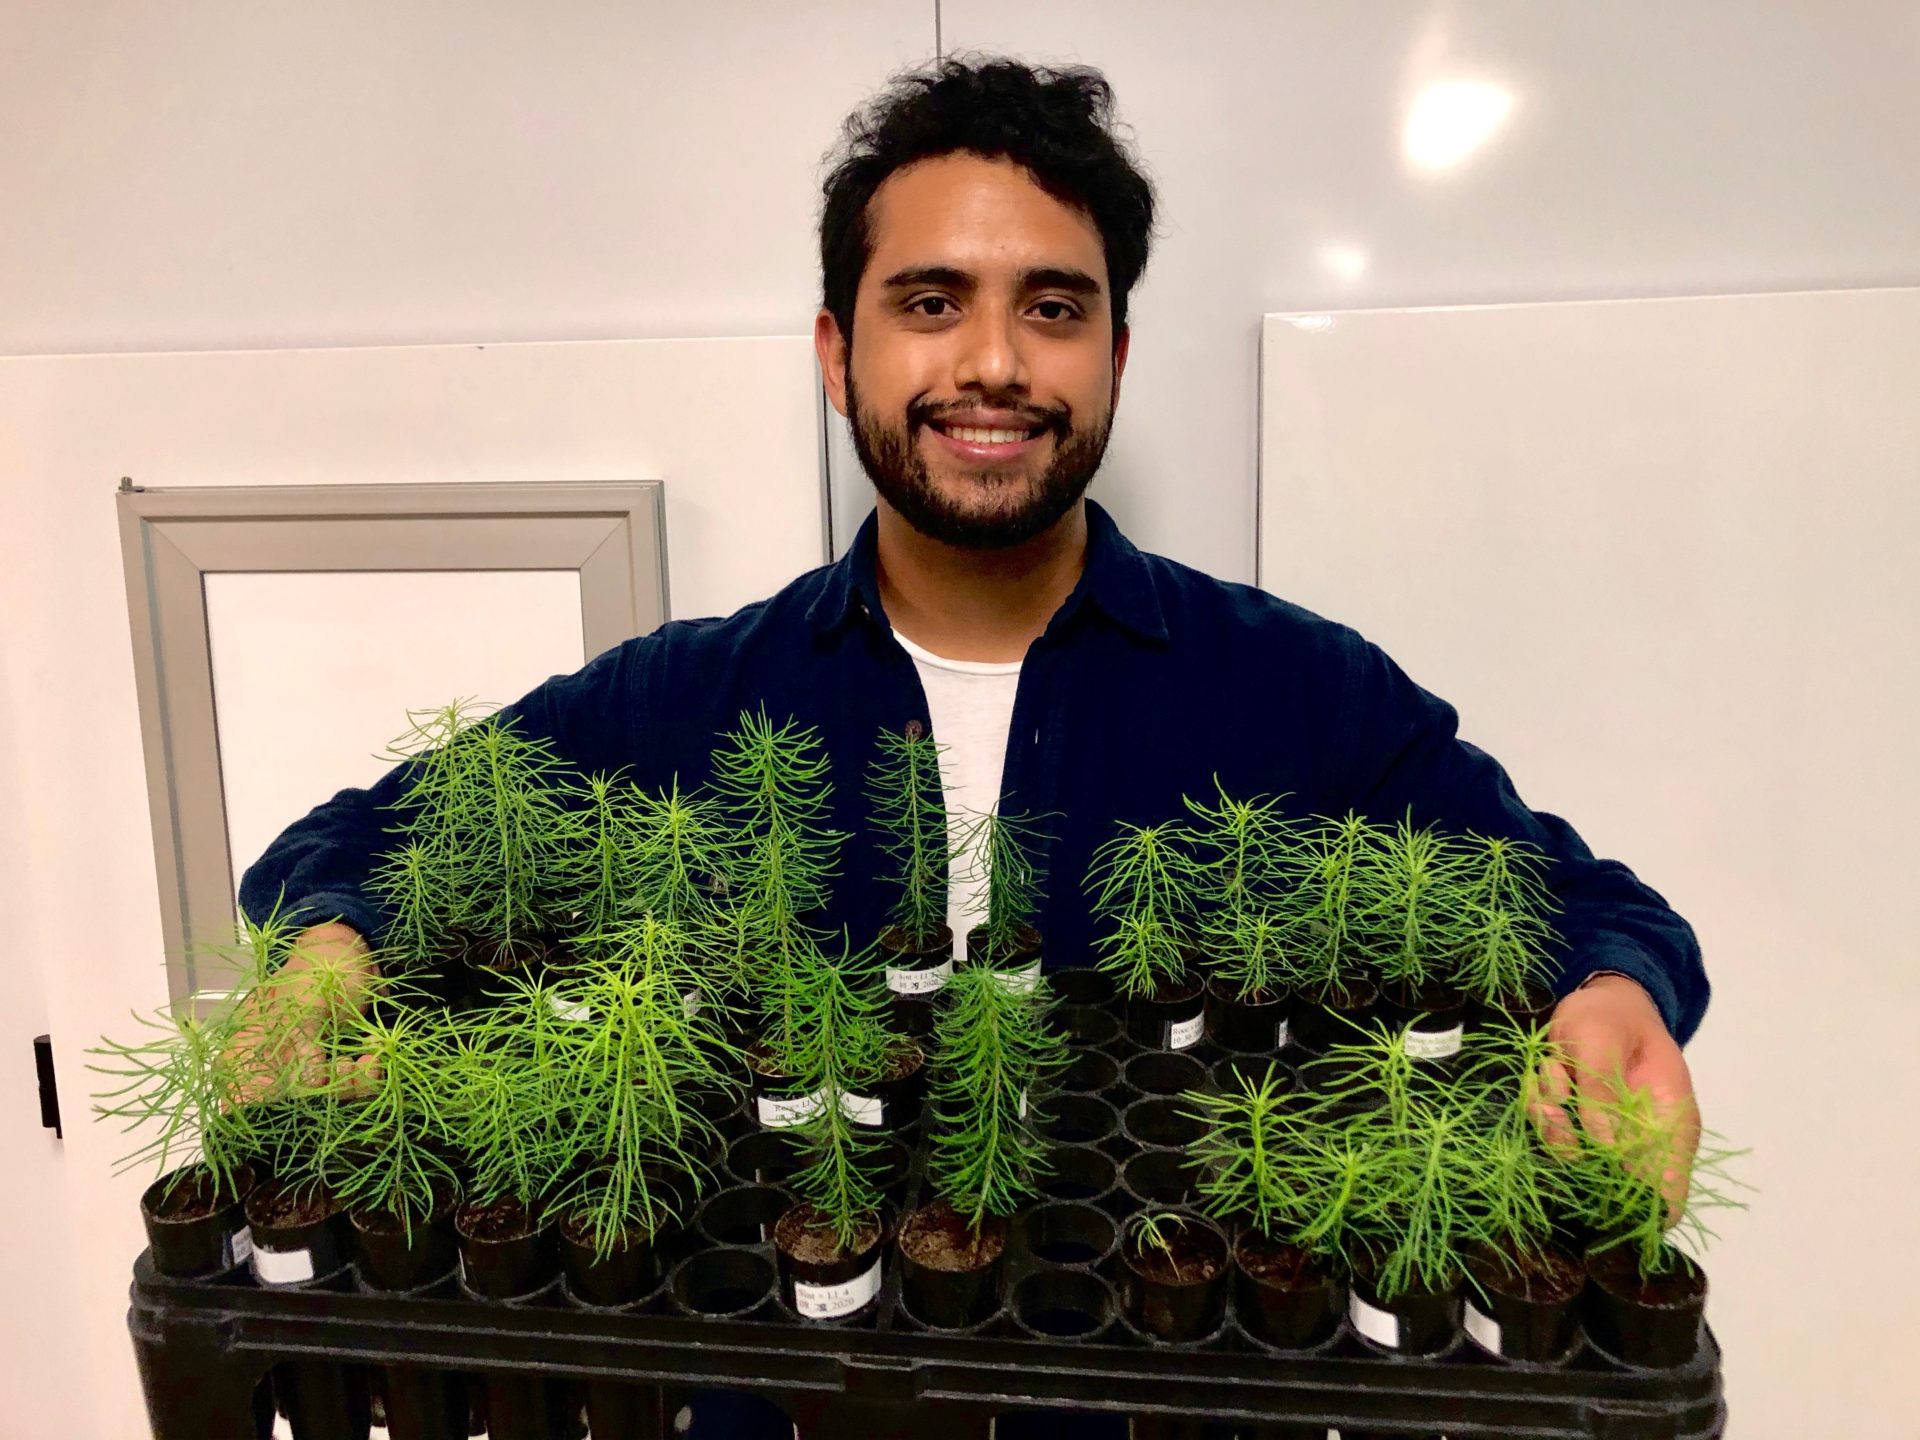 Man smiling and holding tray of plants